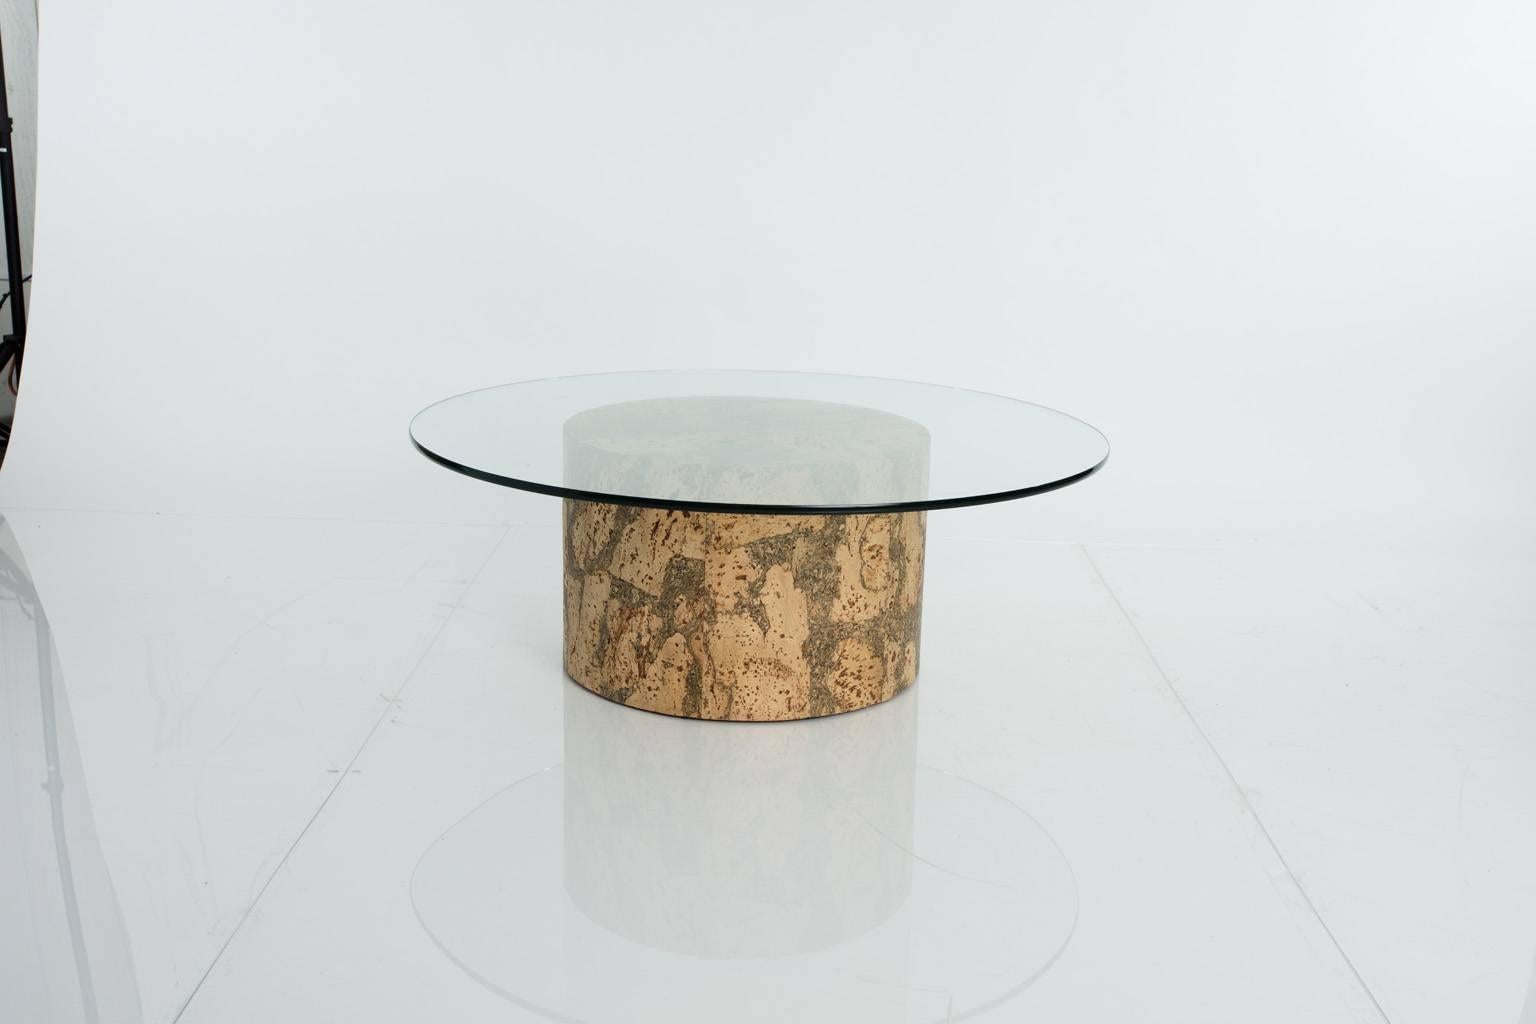 Round cork coffee table with a glass top, crafted in the manner of Paul Frankl.